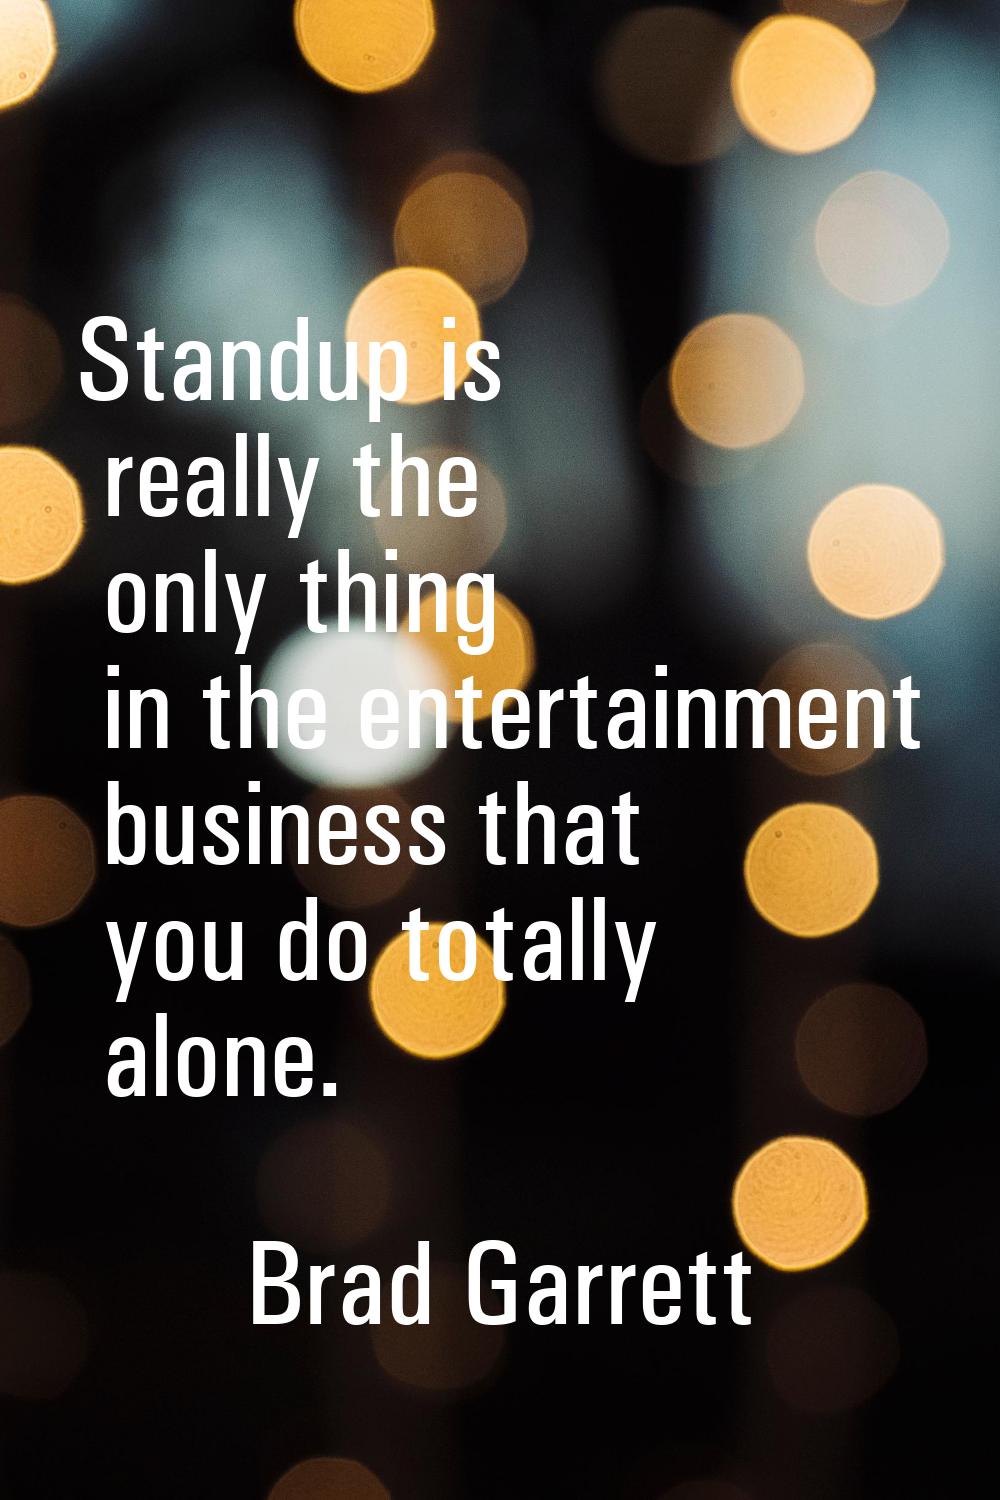 Standup is really the only thing in the entertainment business that you do totally alone.